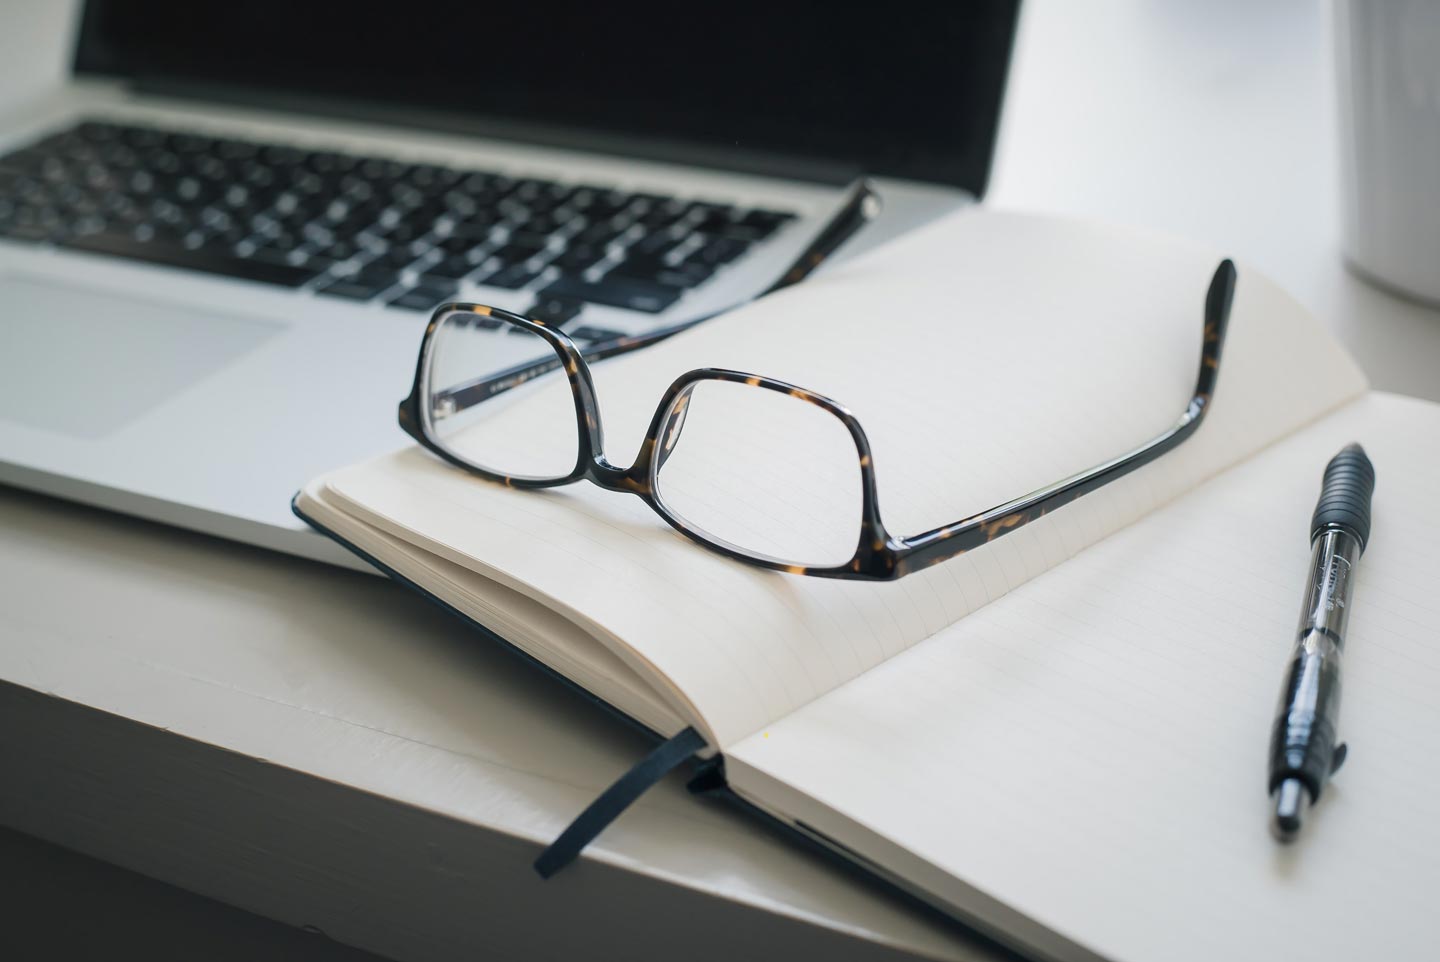 A pair of reading glasses sits on an open notebook next to a pen and a laptop on a desk.